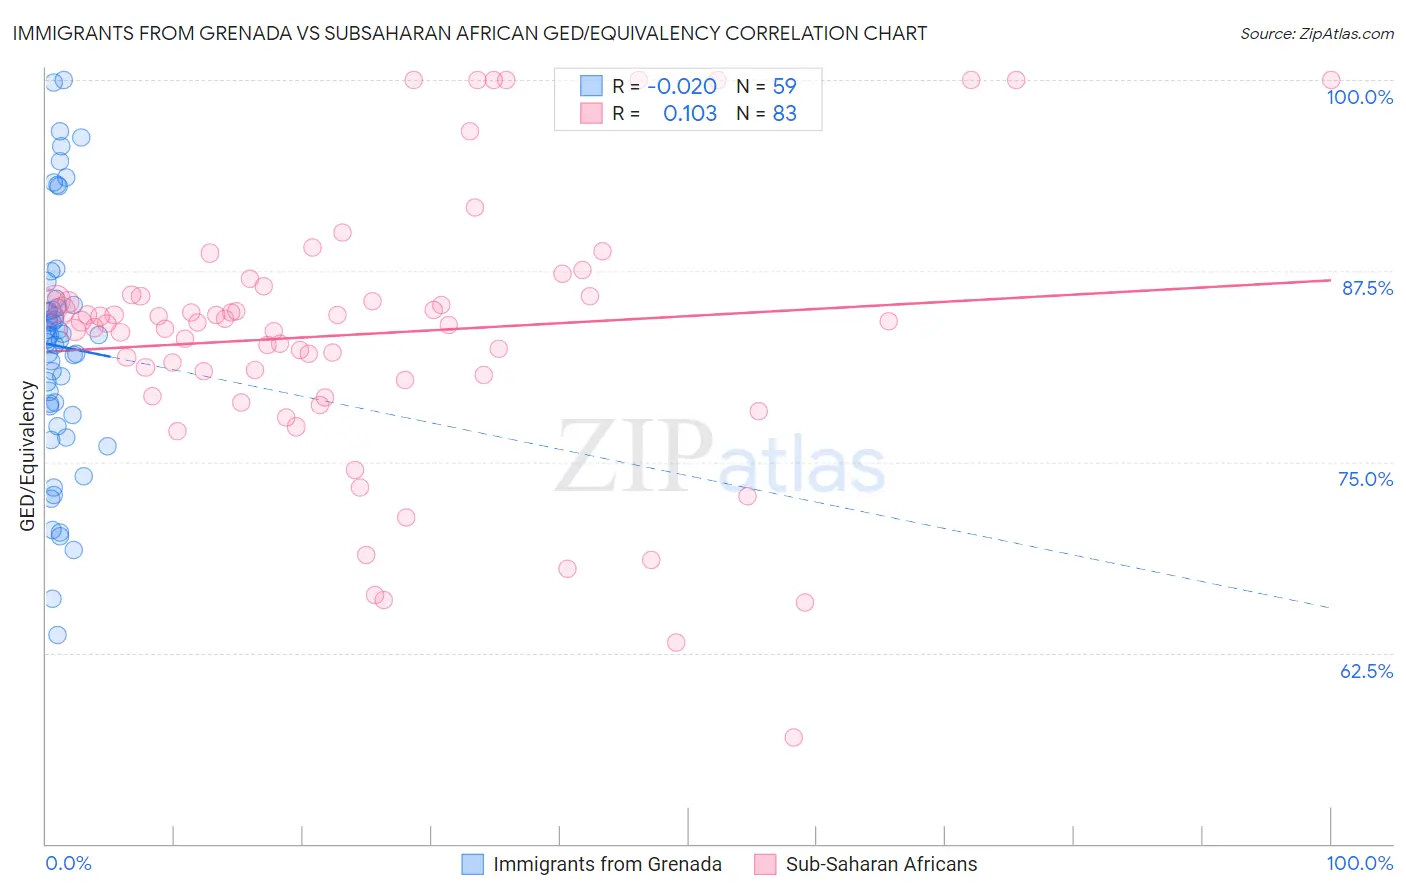 Immigrants from Grenada vs Subsaharan African GED/Equivalency